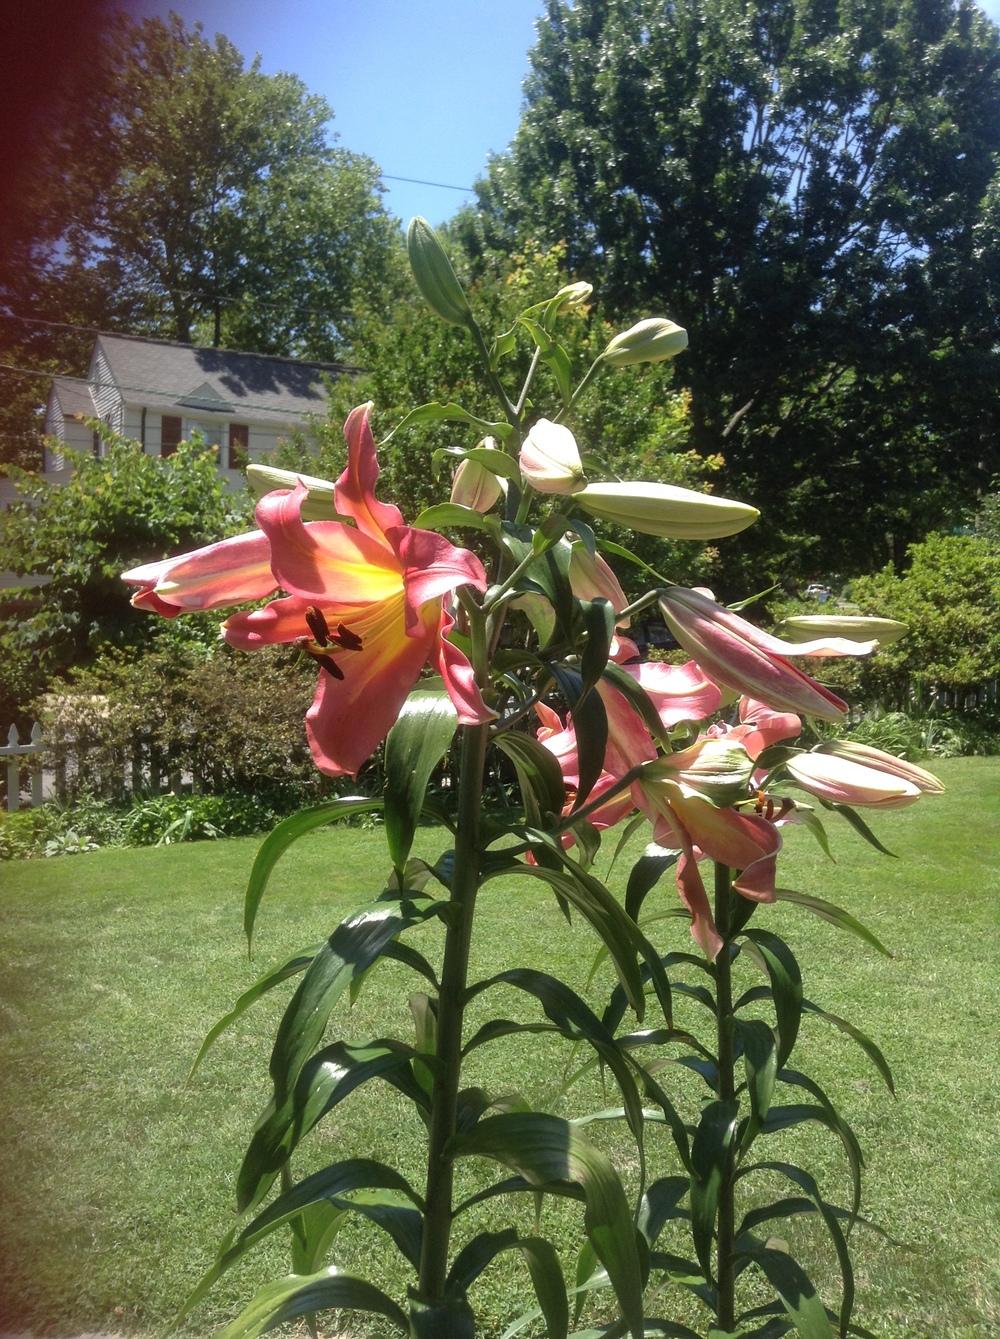 Photo of Lilies (Lilium) uploaded by 5601Lisa